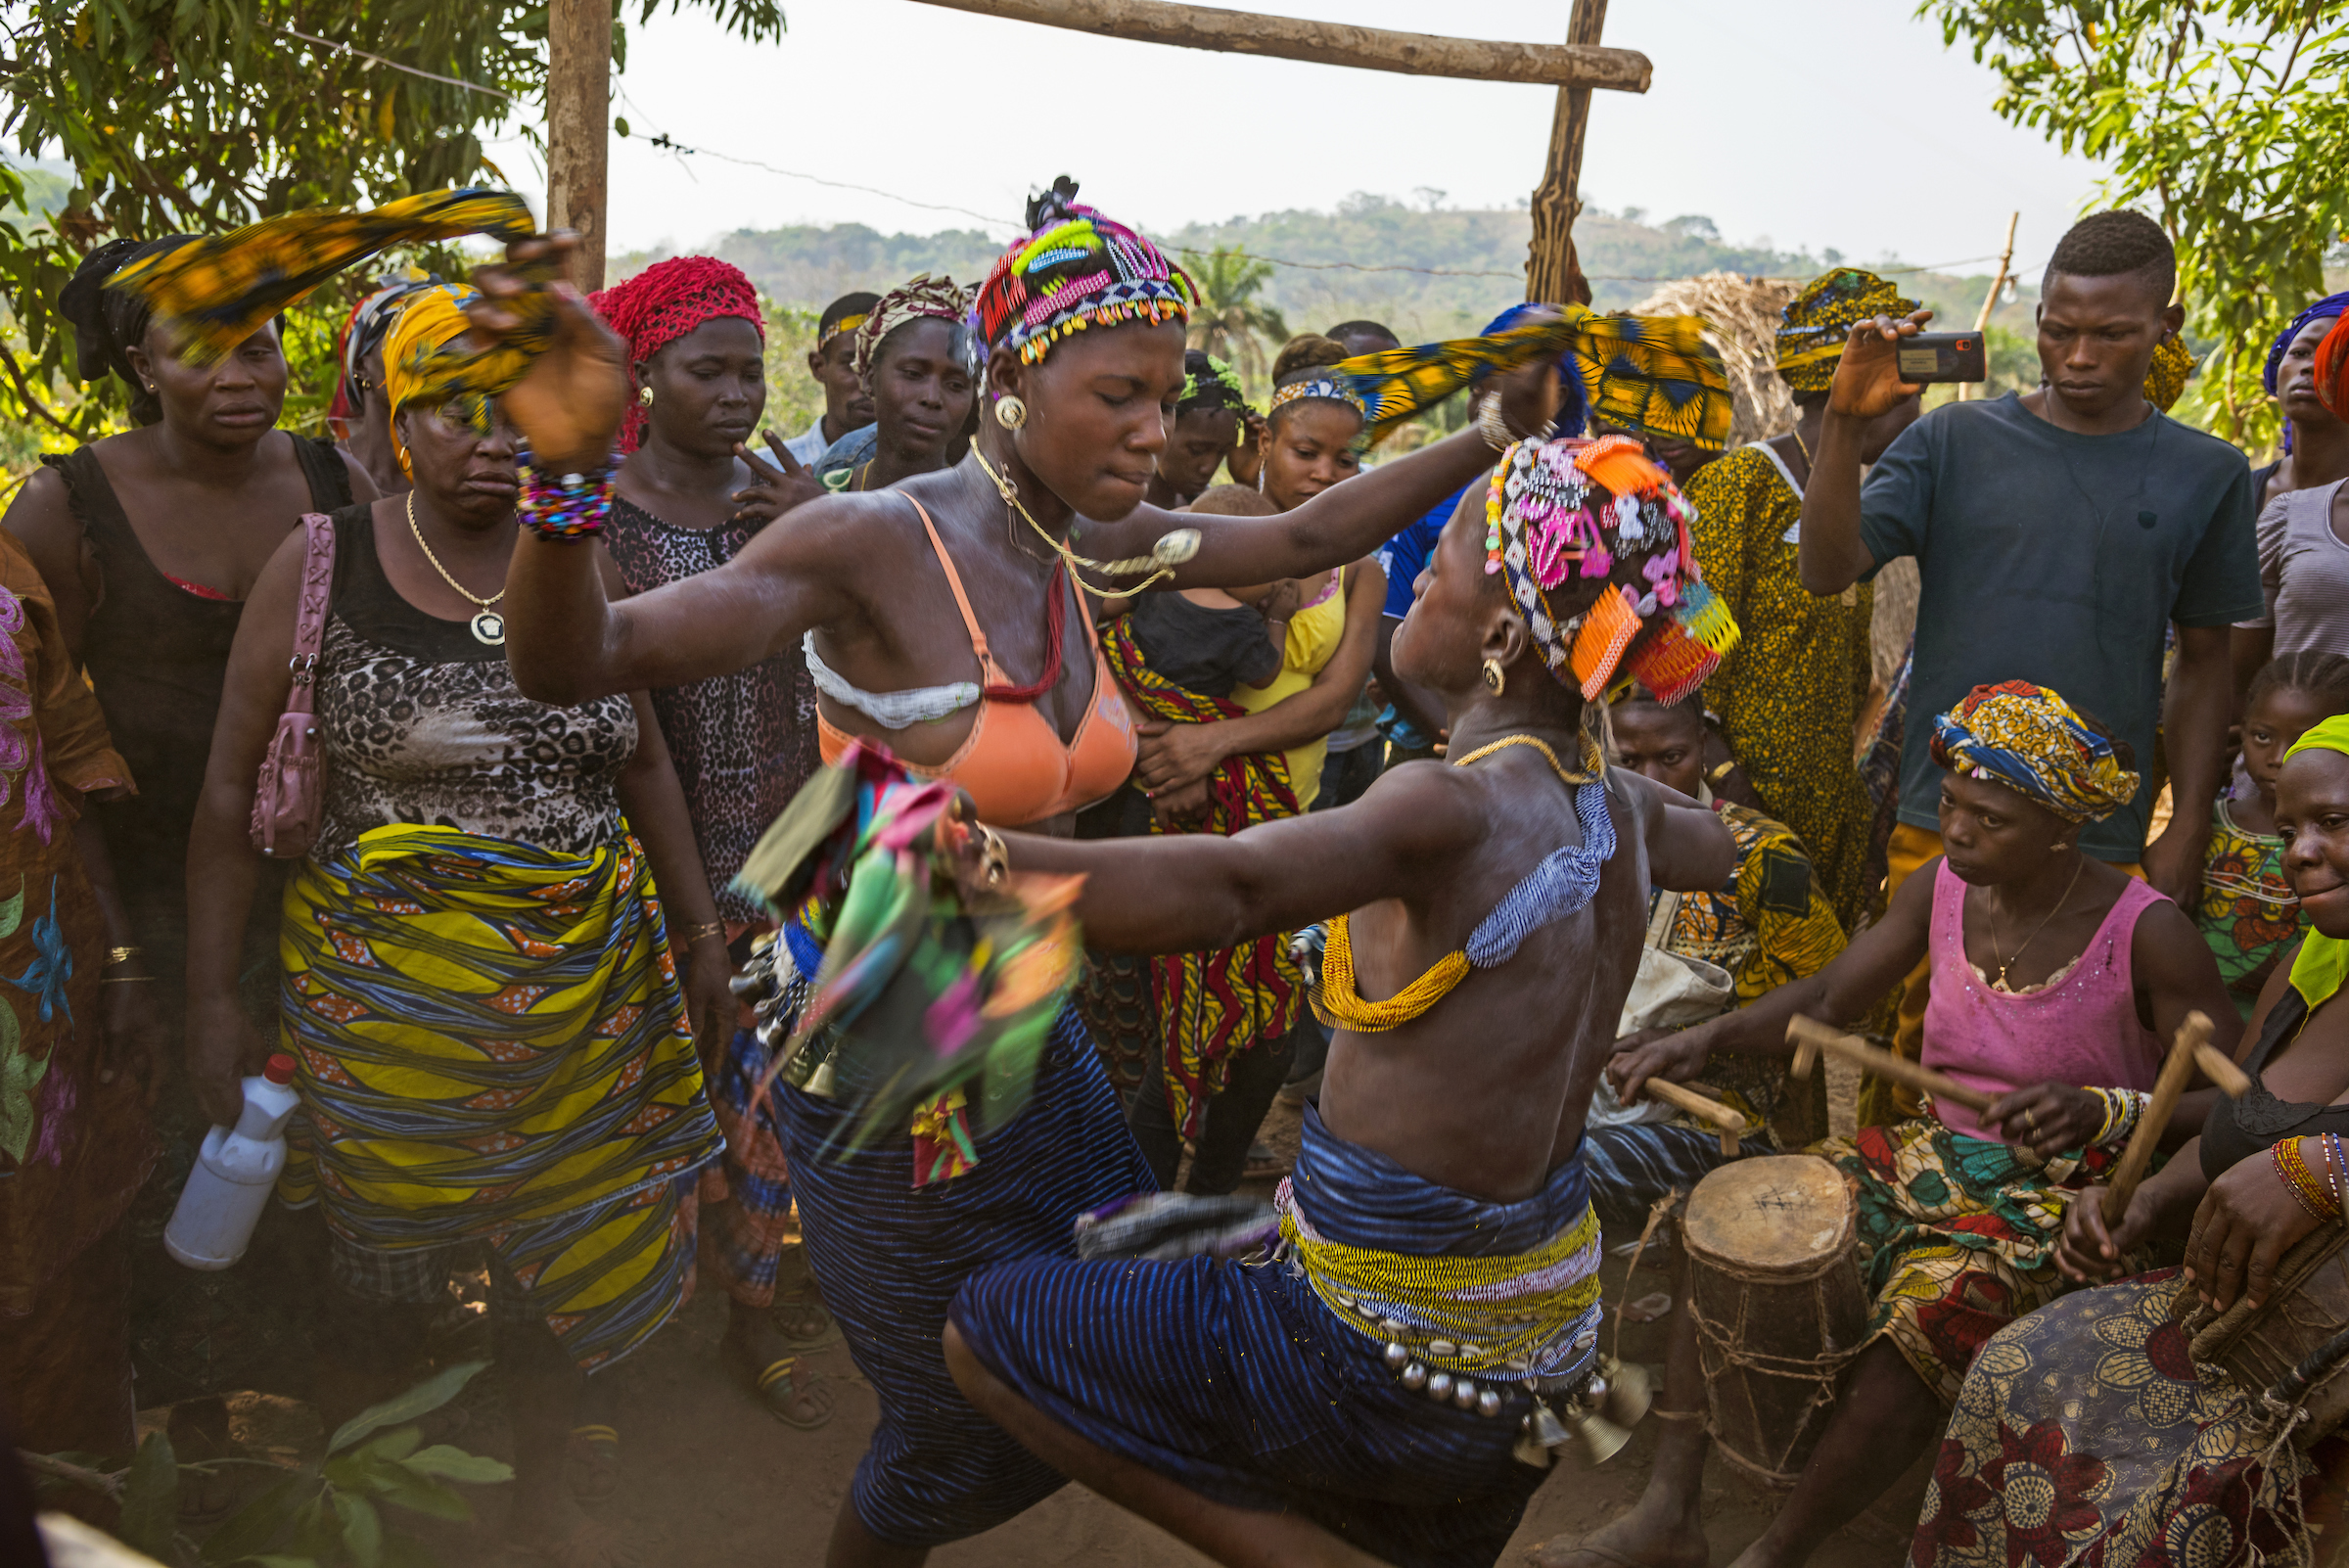 Graduates of this new kind of Bondo ceremony that does not include genital cutting celebrate with family and friends.